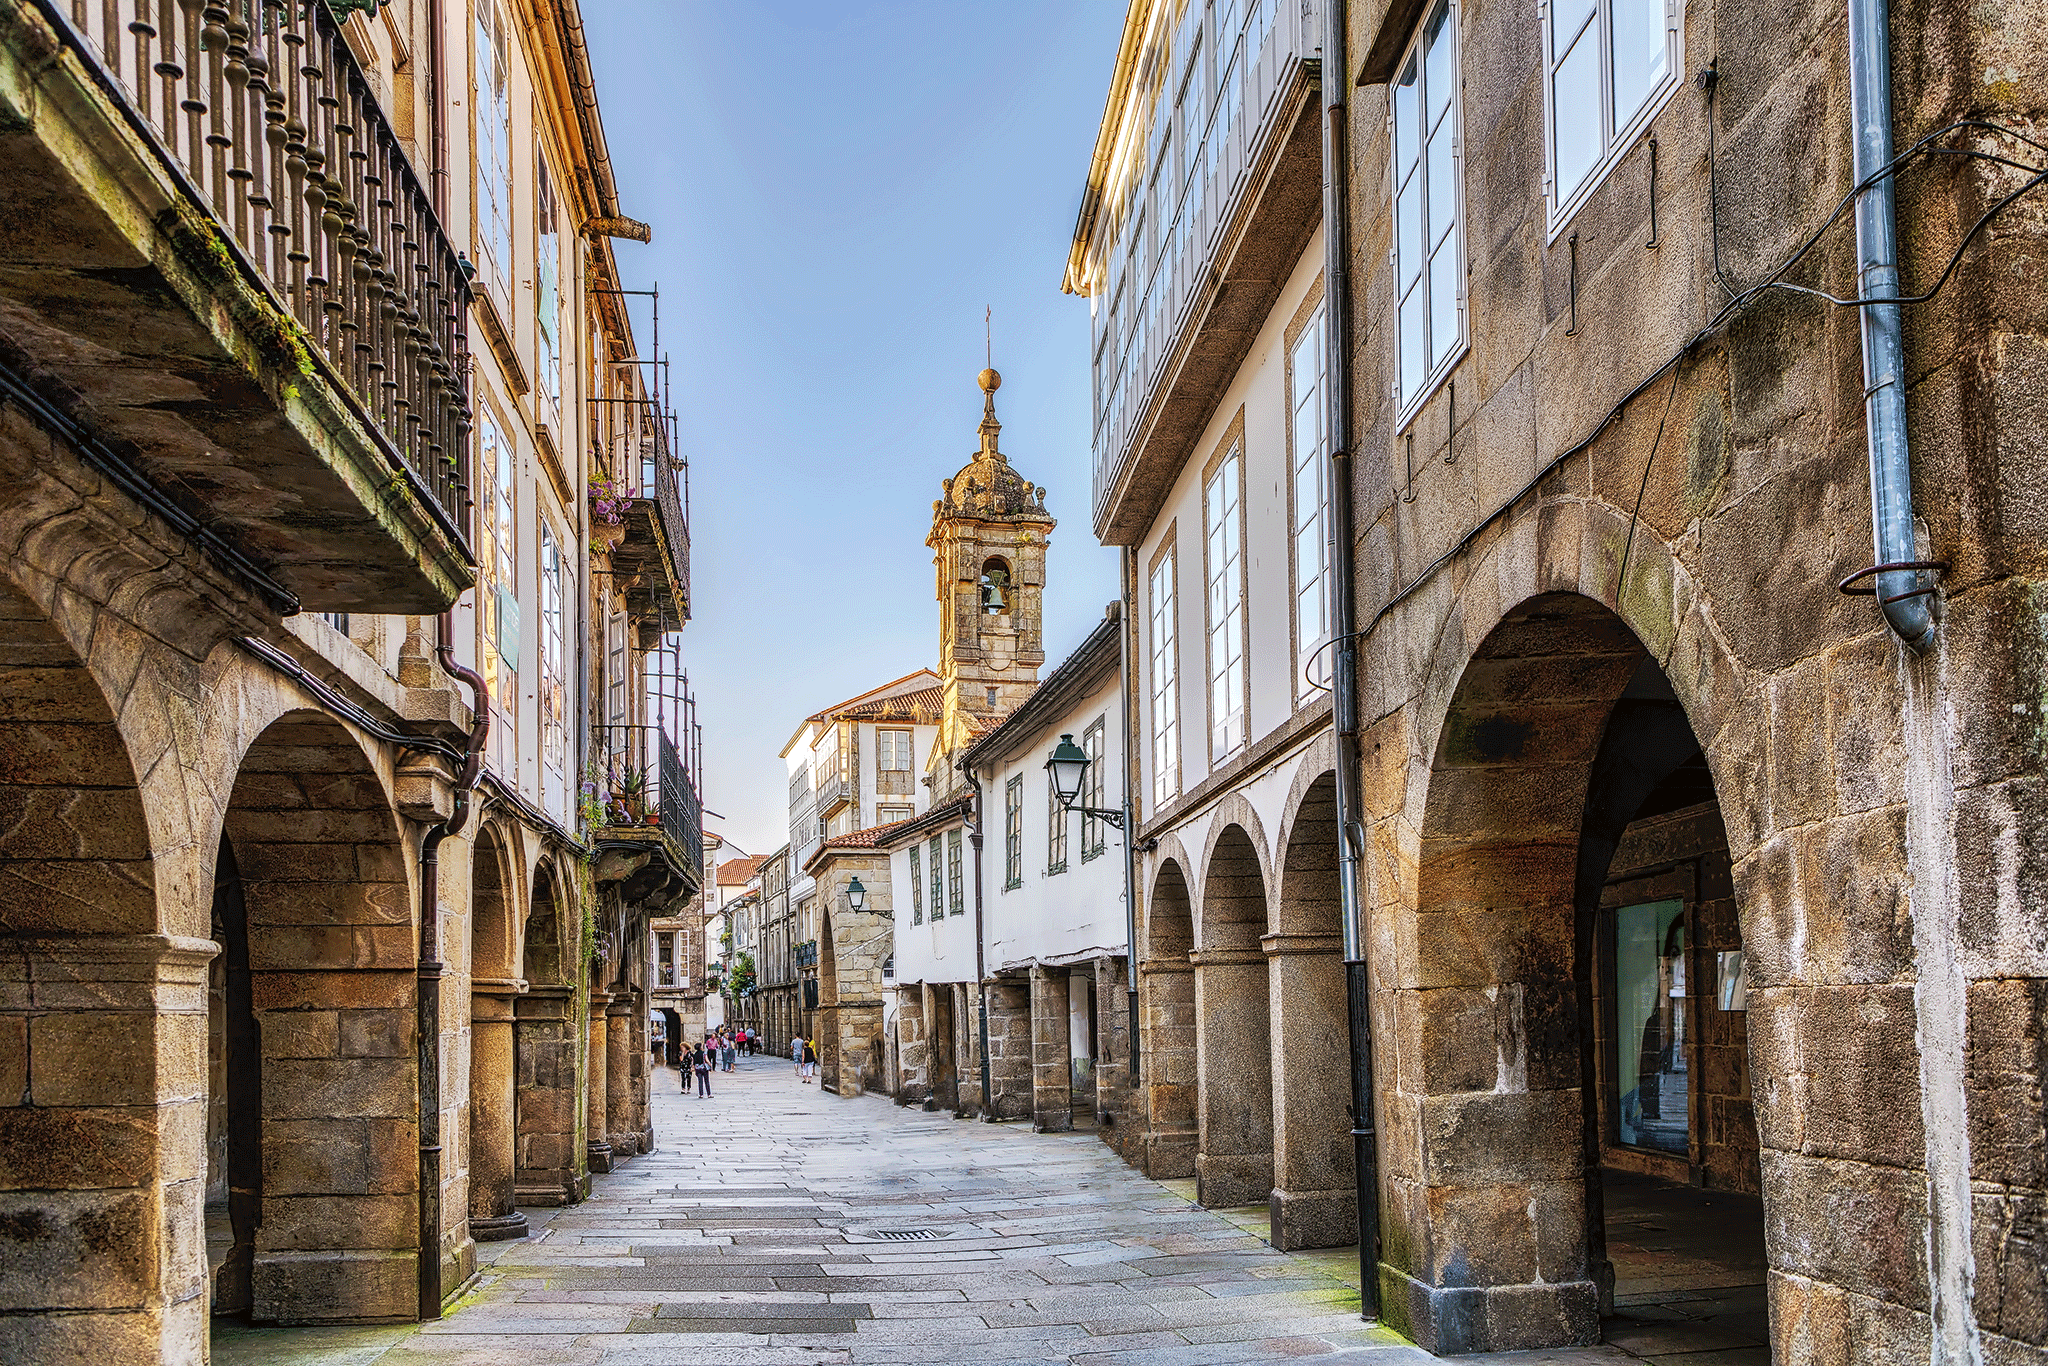 The picturesque city of Santiago de Compostela is a worthwhile destination for gourmets as well as pilgrims.